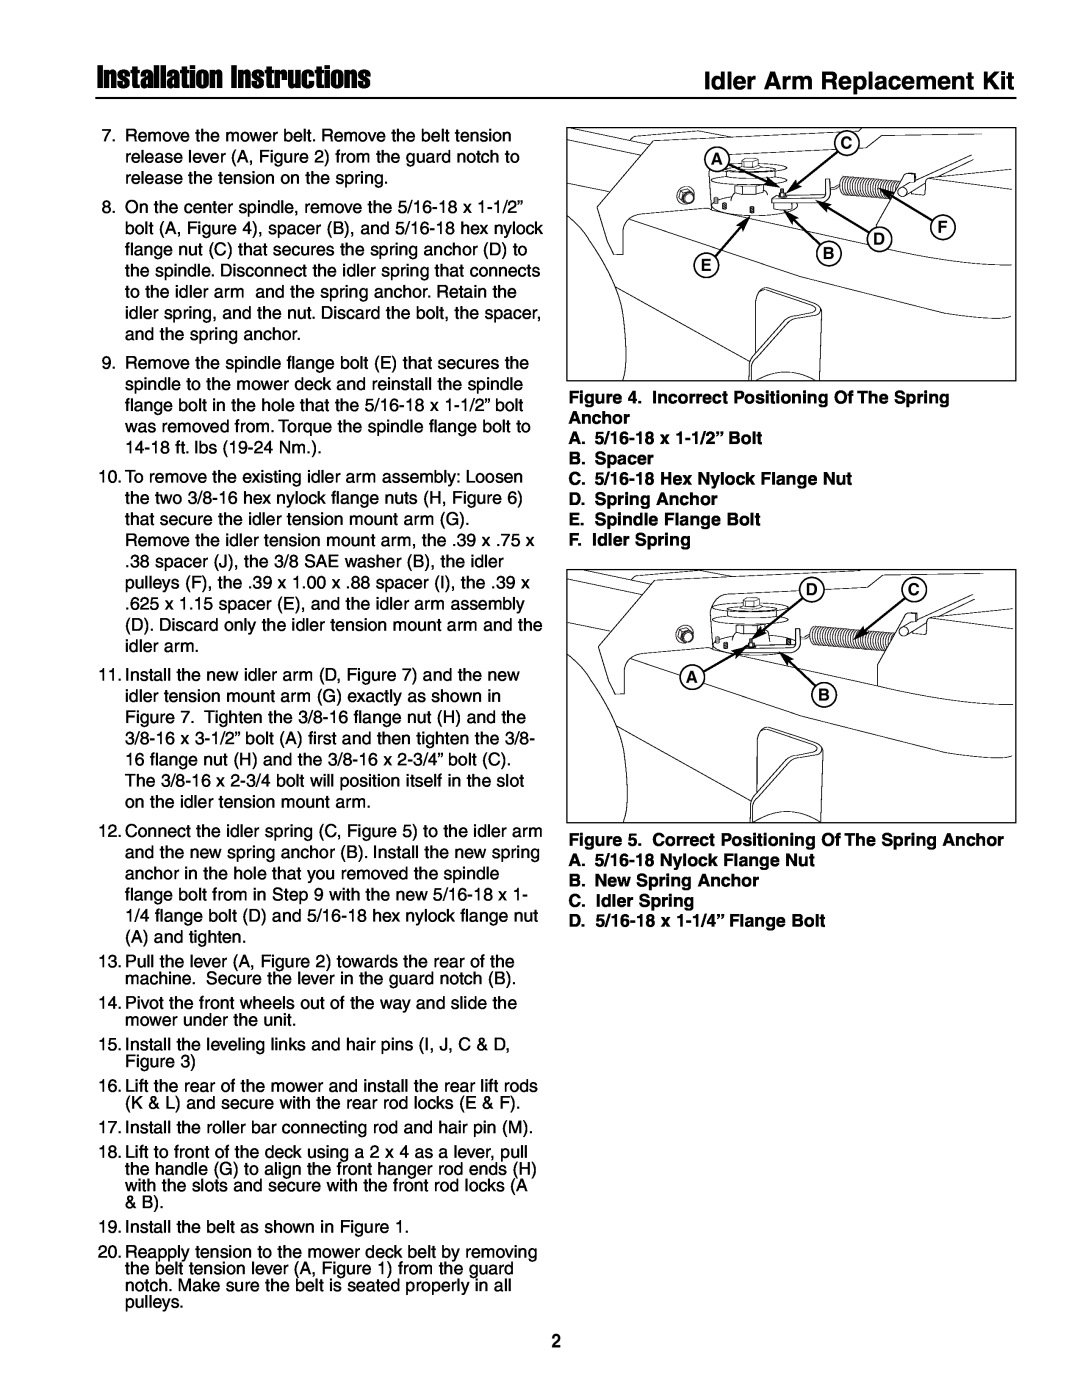 Simplicity TP 200 7309 00, 5600082, 5600081 installation instructions Installation Instructions, Idler Arm Replacement Kit 